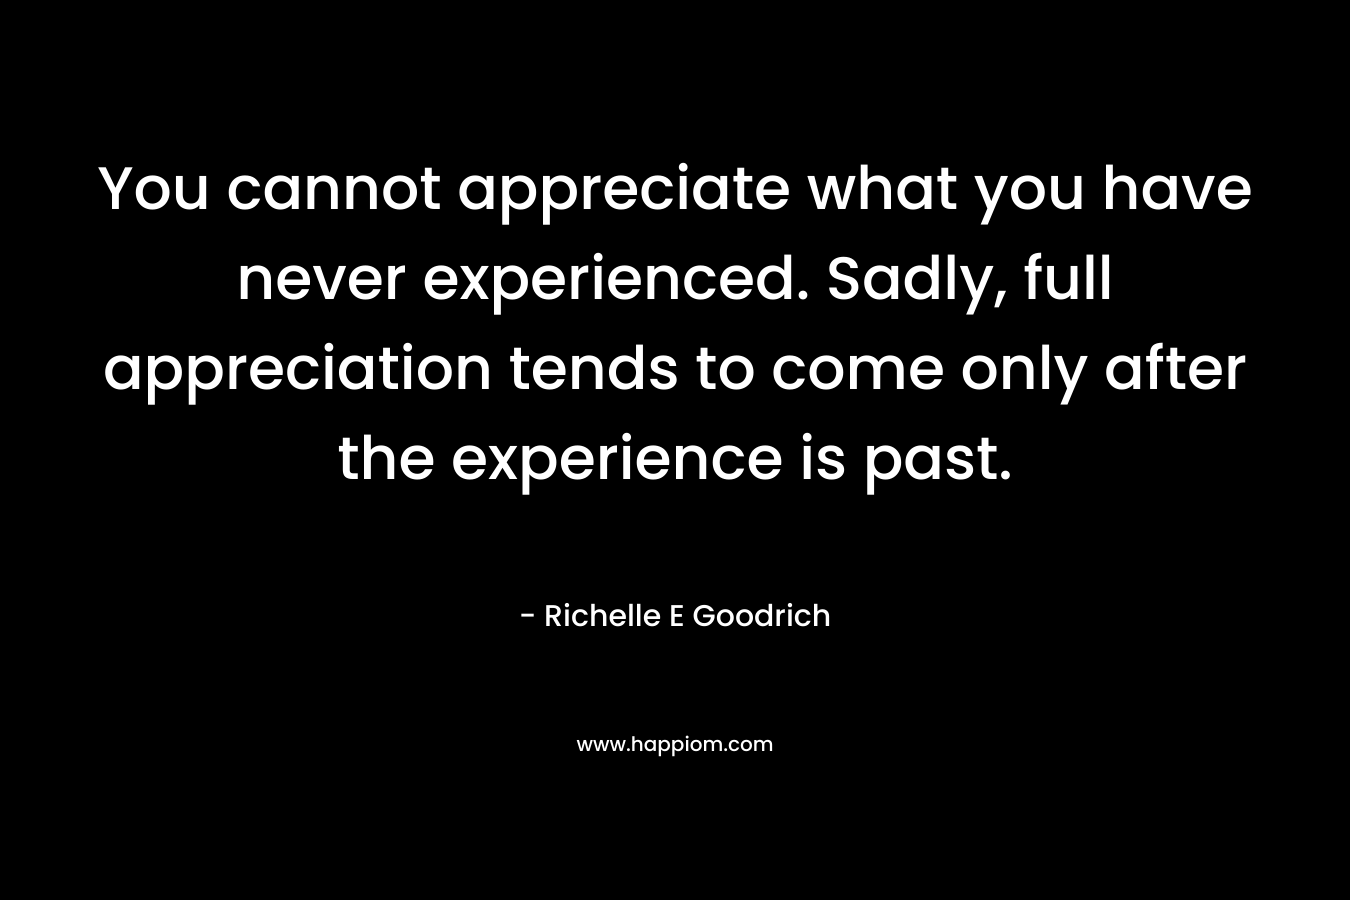 You cannot appreciate what you have never experienced. Sadly, full appreciation tends to come only after the experience is past.